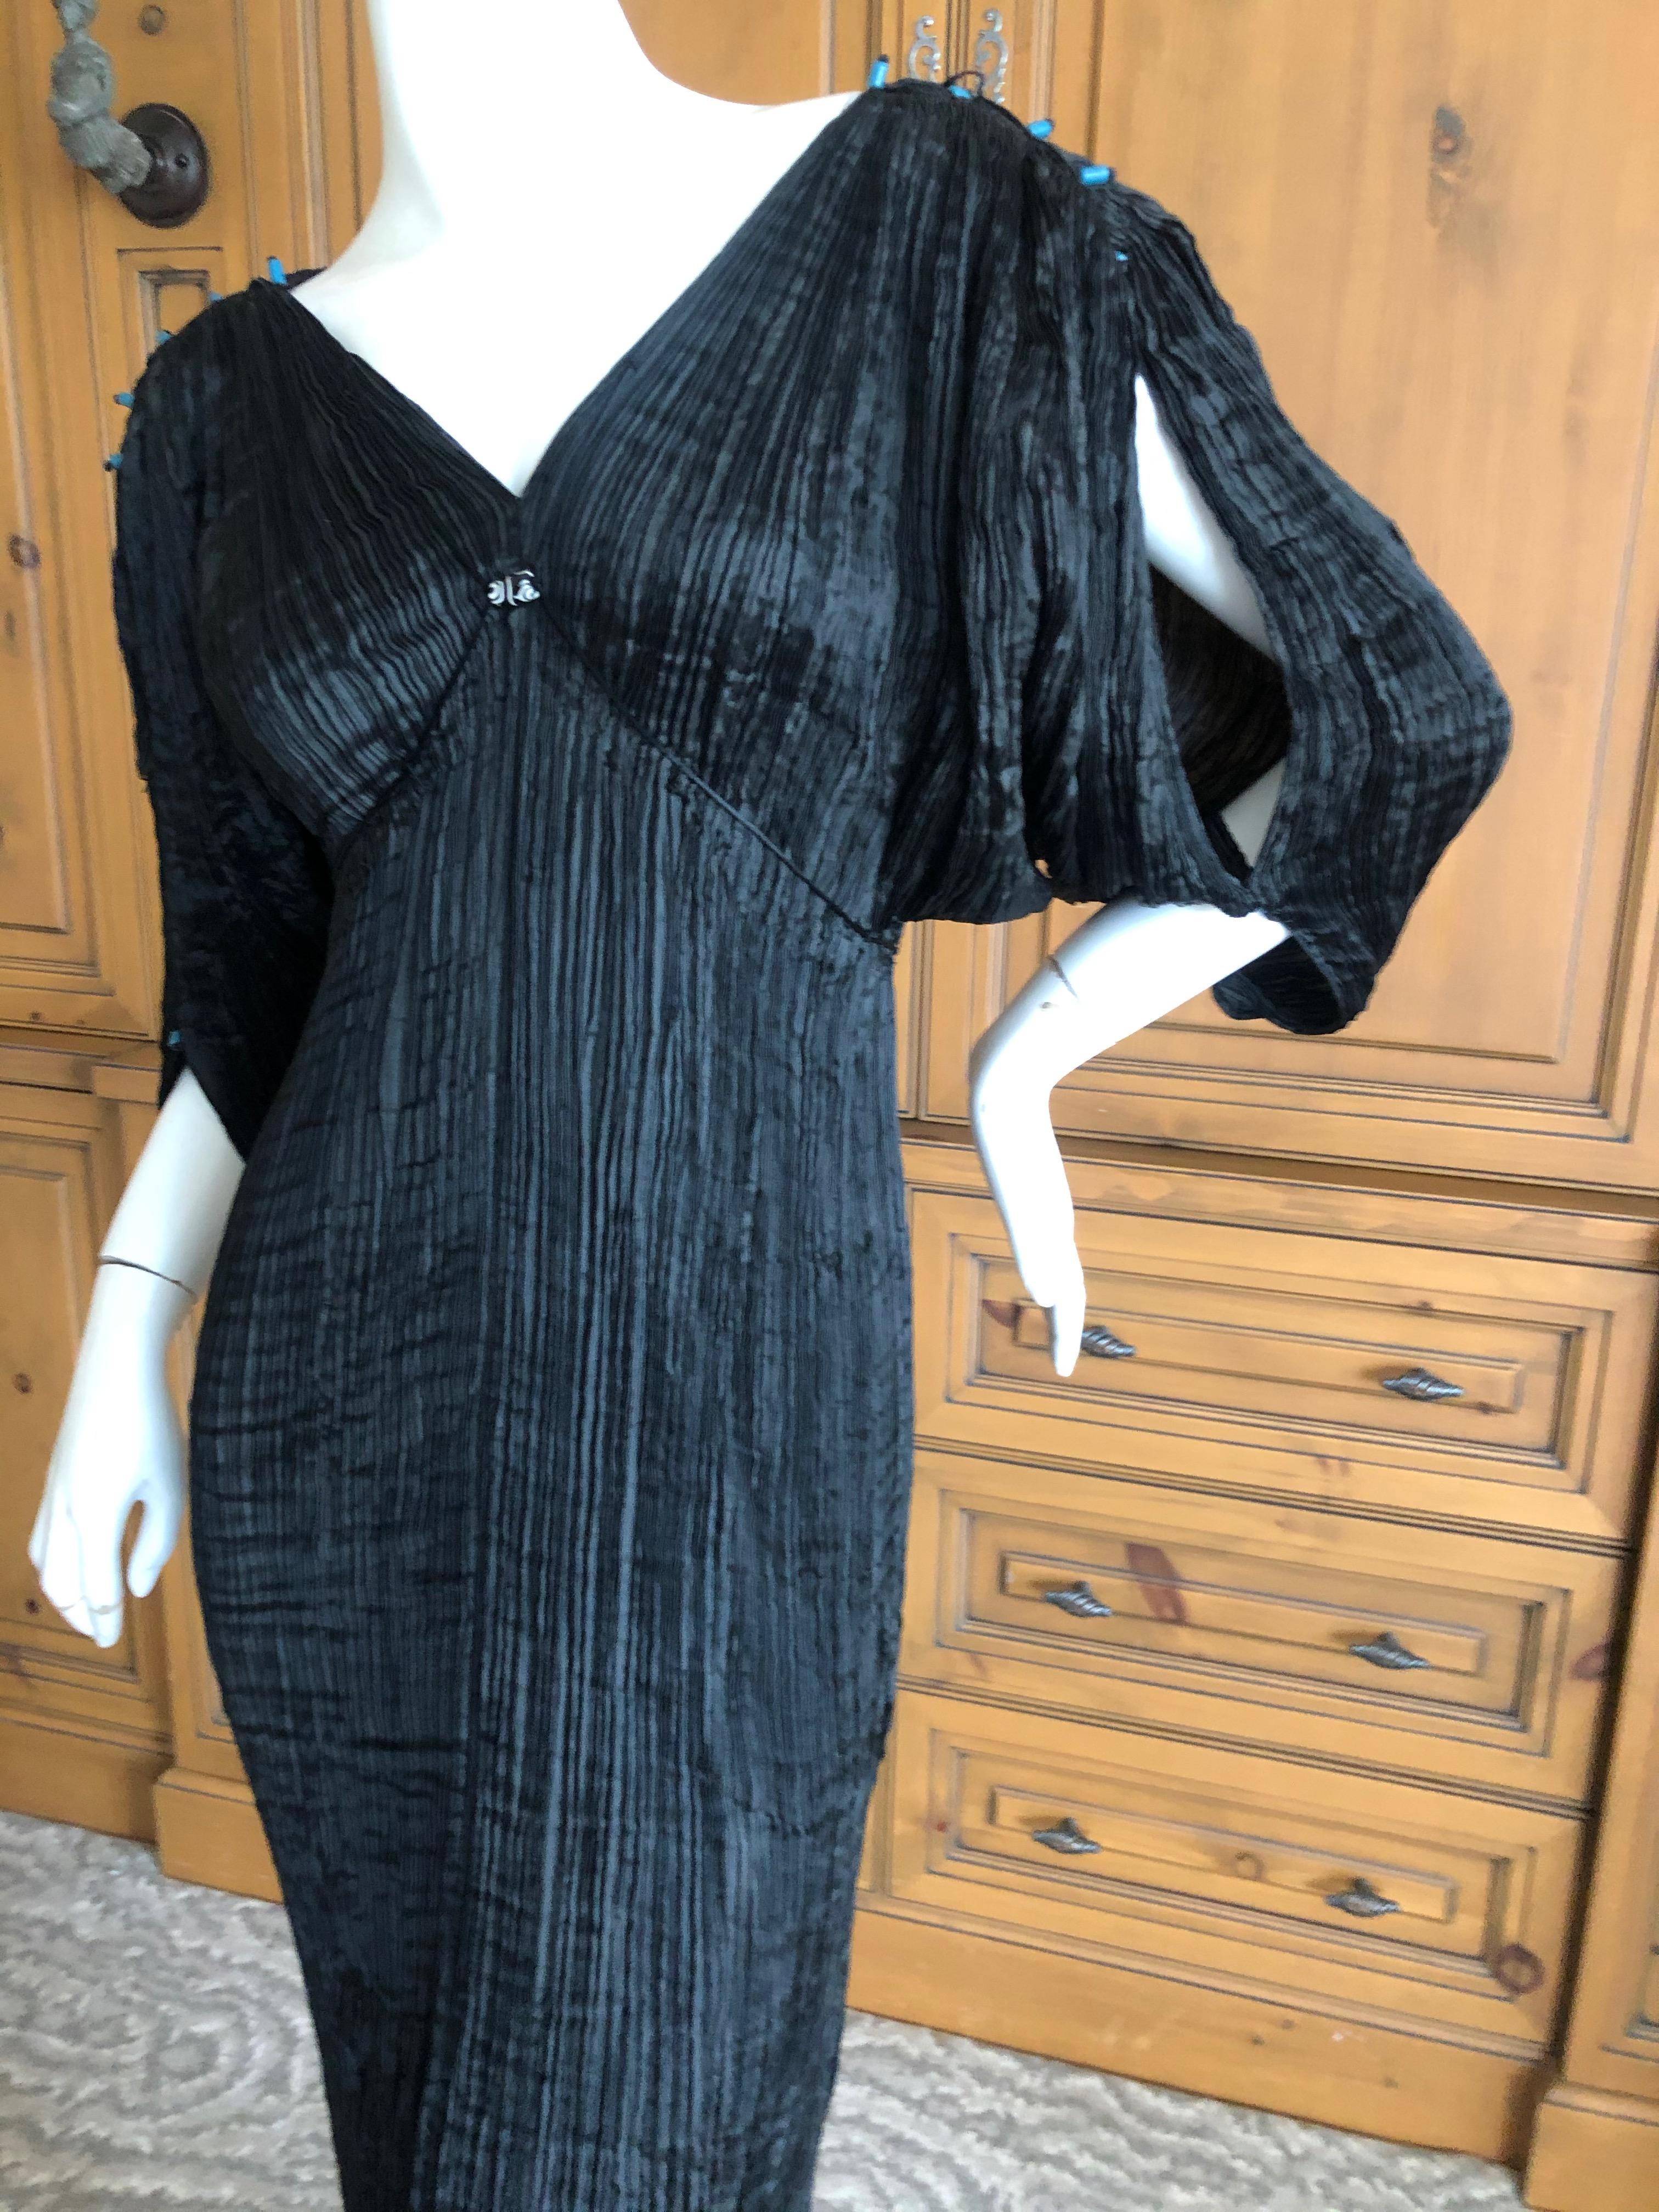 Mariano Fortuny Attributed Black Delphos Dress
Mariano Fortuny revolutionized fashion when he eliminated the corset and designed the pleated Delphos gown to be worn without restrictive undergarments.
Created by a secret pleating method and